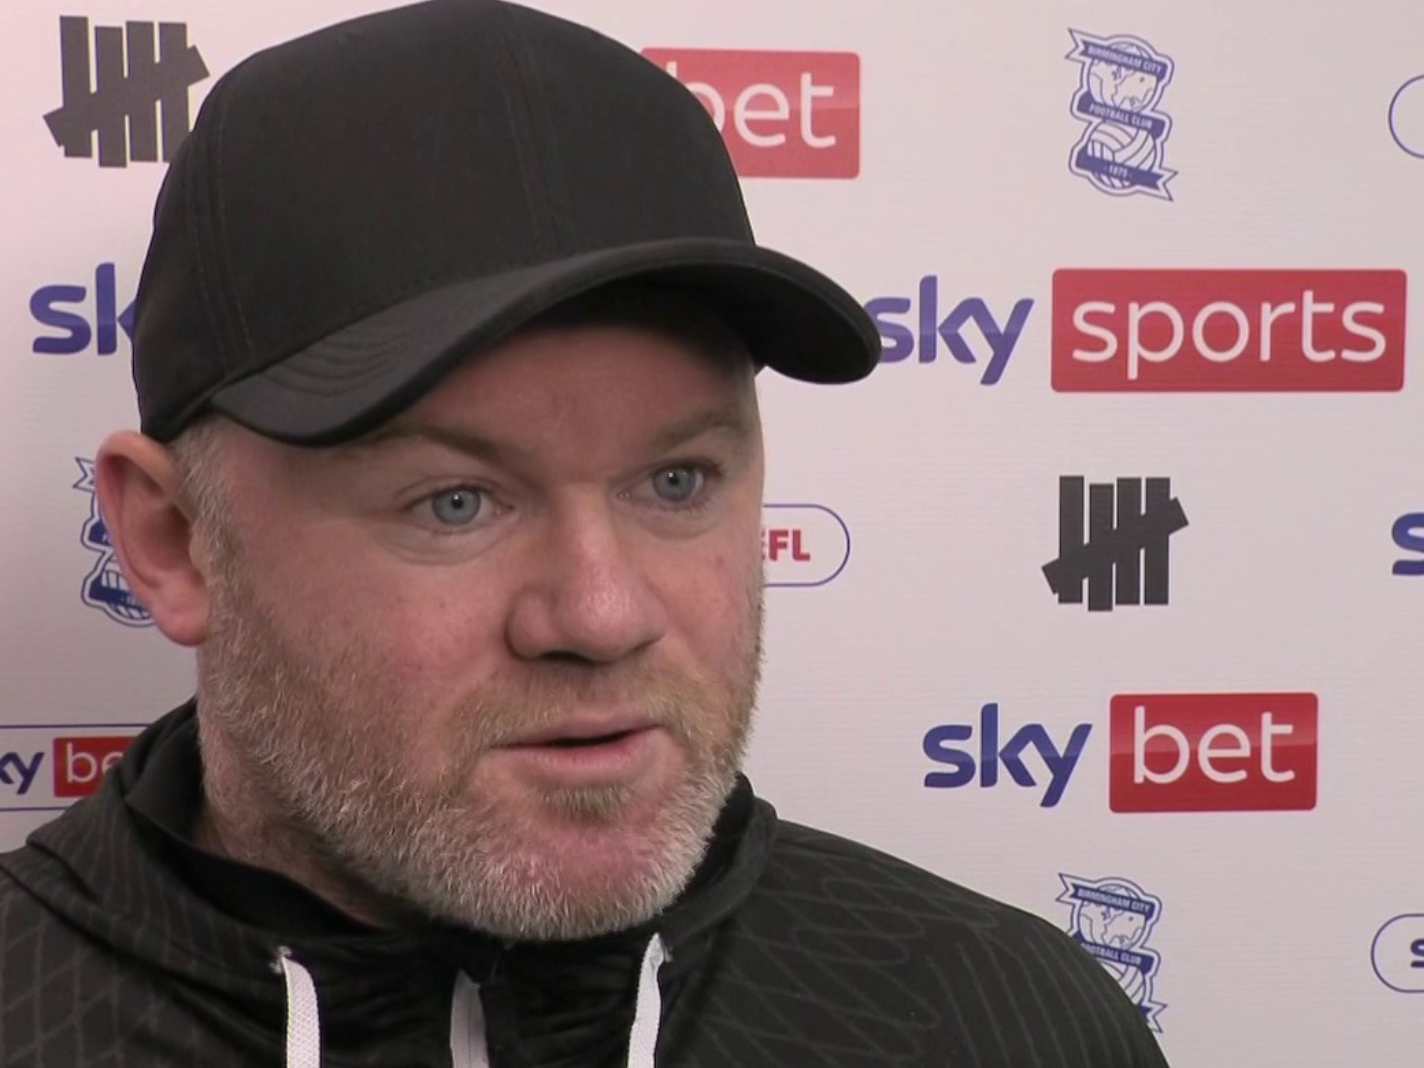 What Rob Wotton Really Said About Wayne Rooney On Sky Sports